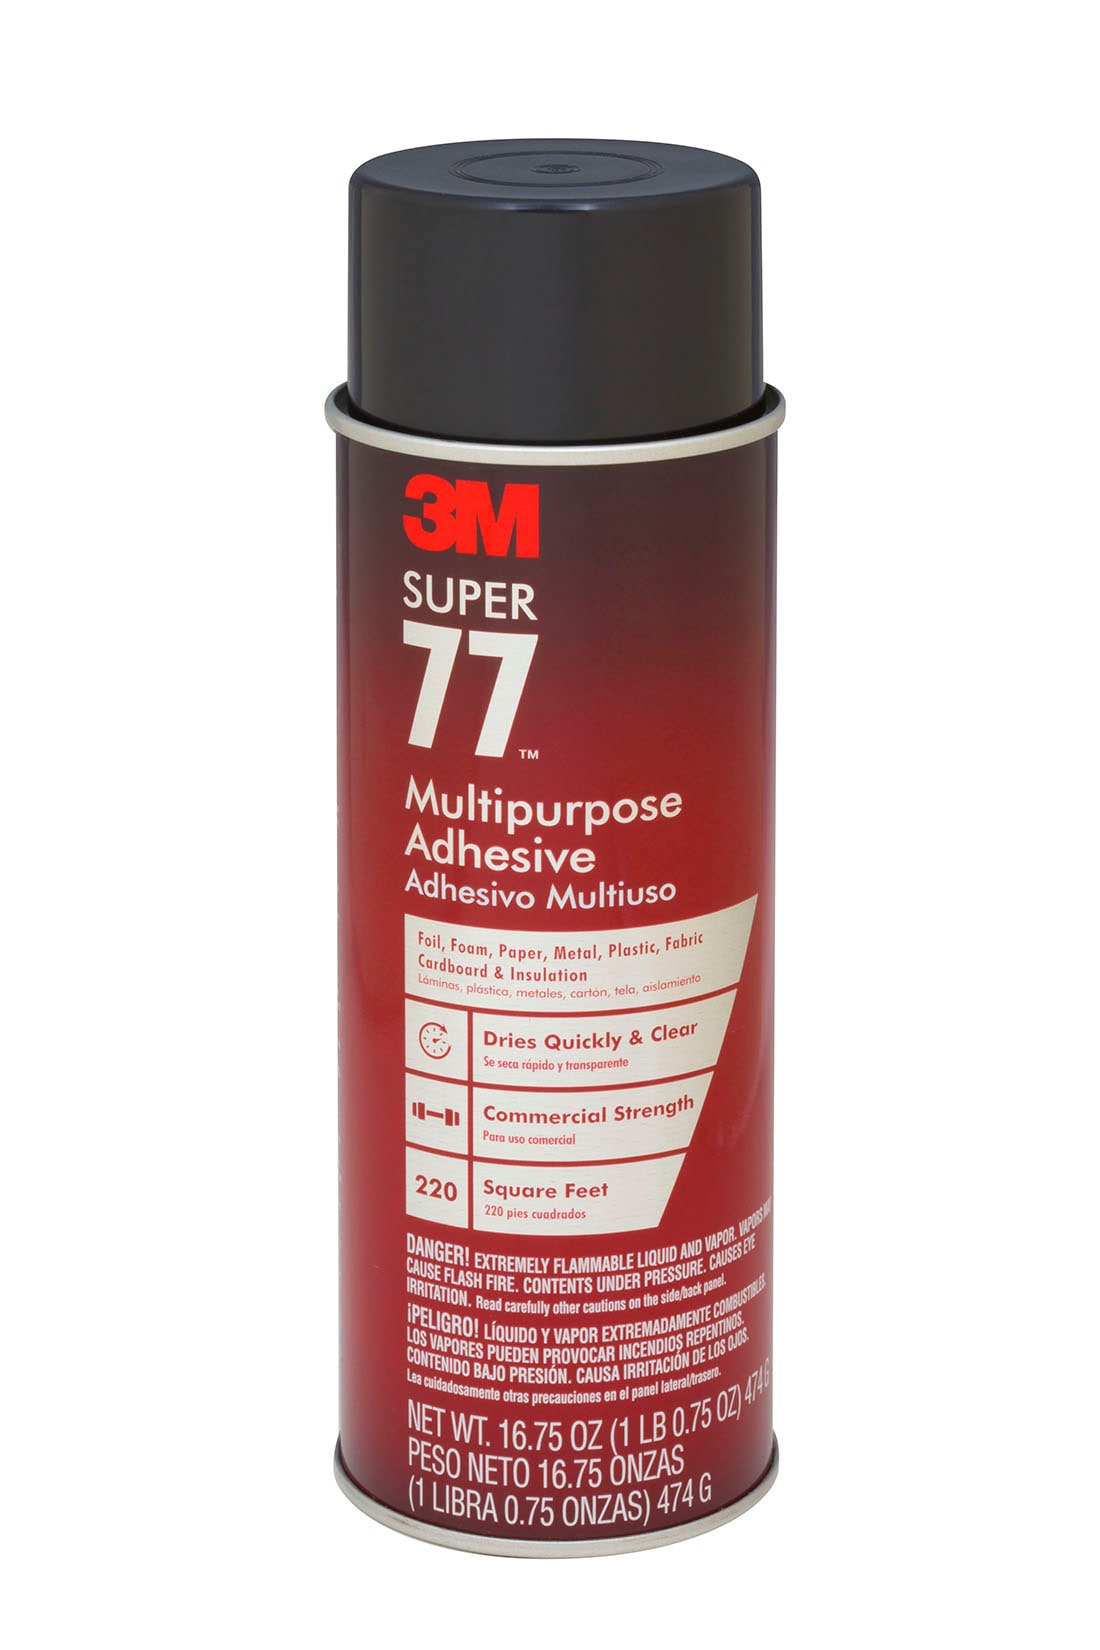 3M Headliner and Fabric Adhesive Clear Automotive Adhesive (Actual